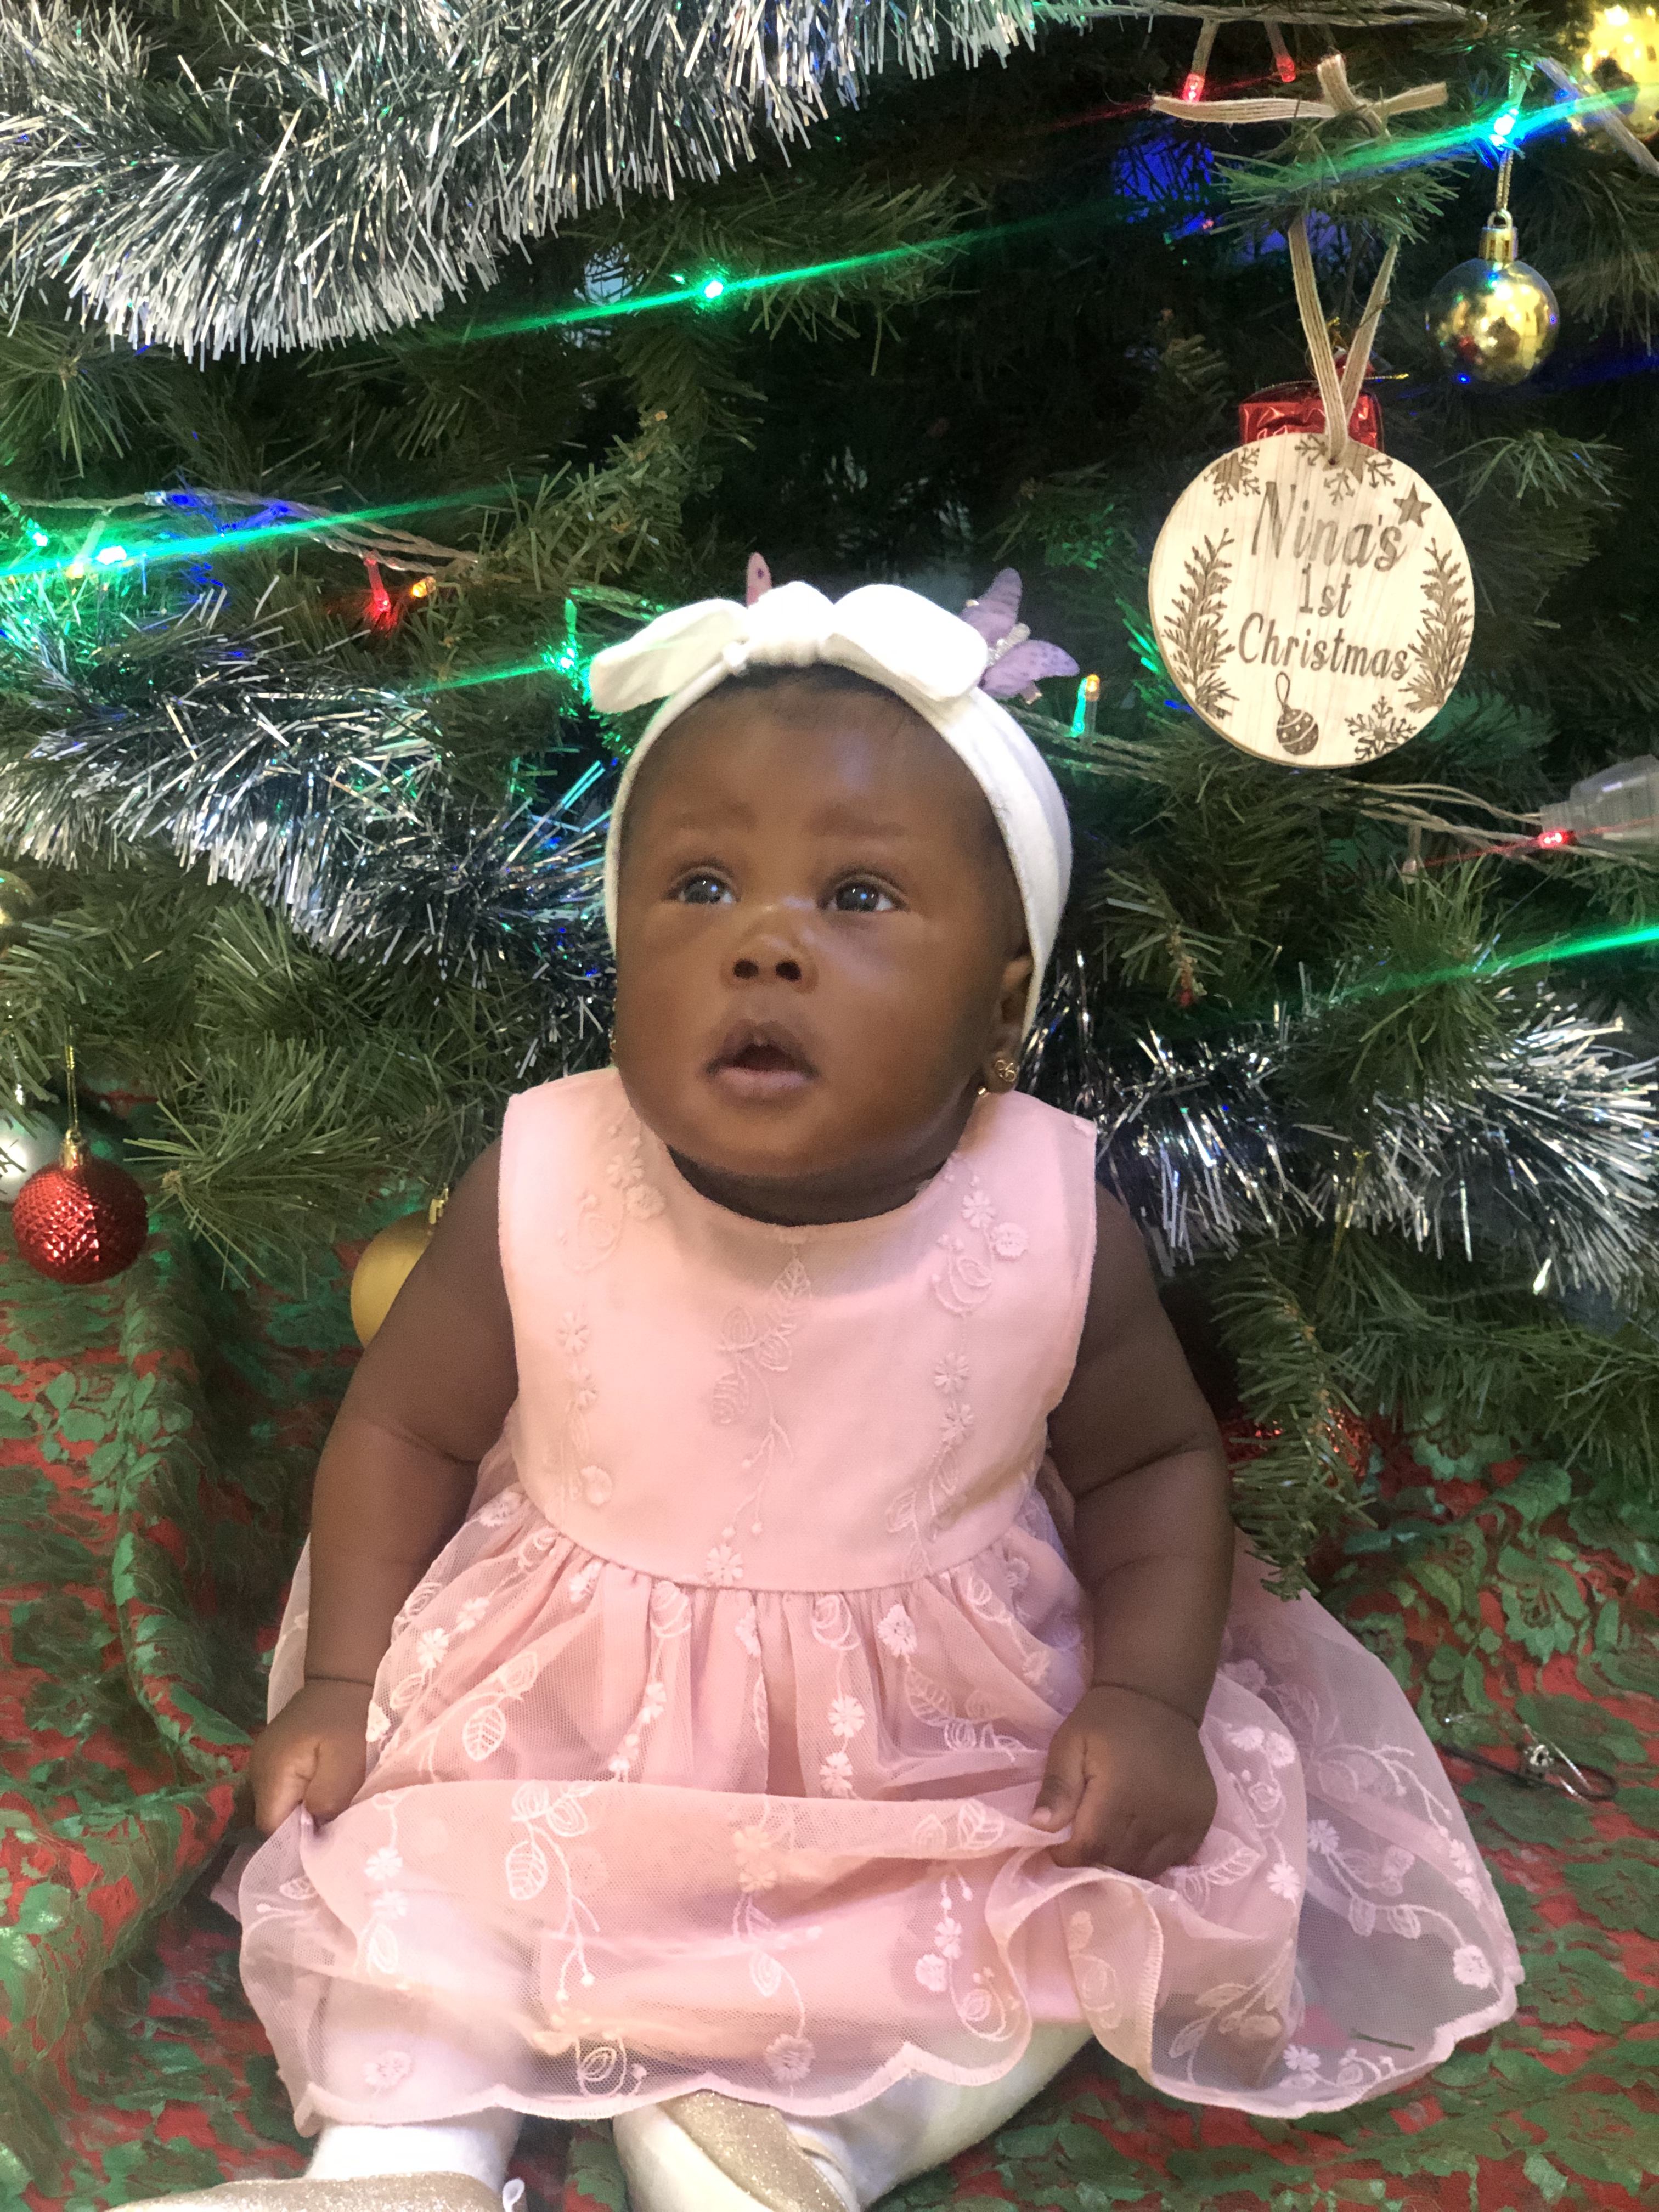 Her first Christmas